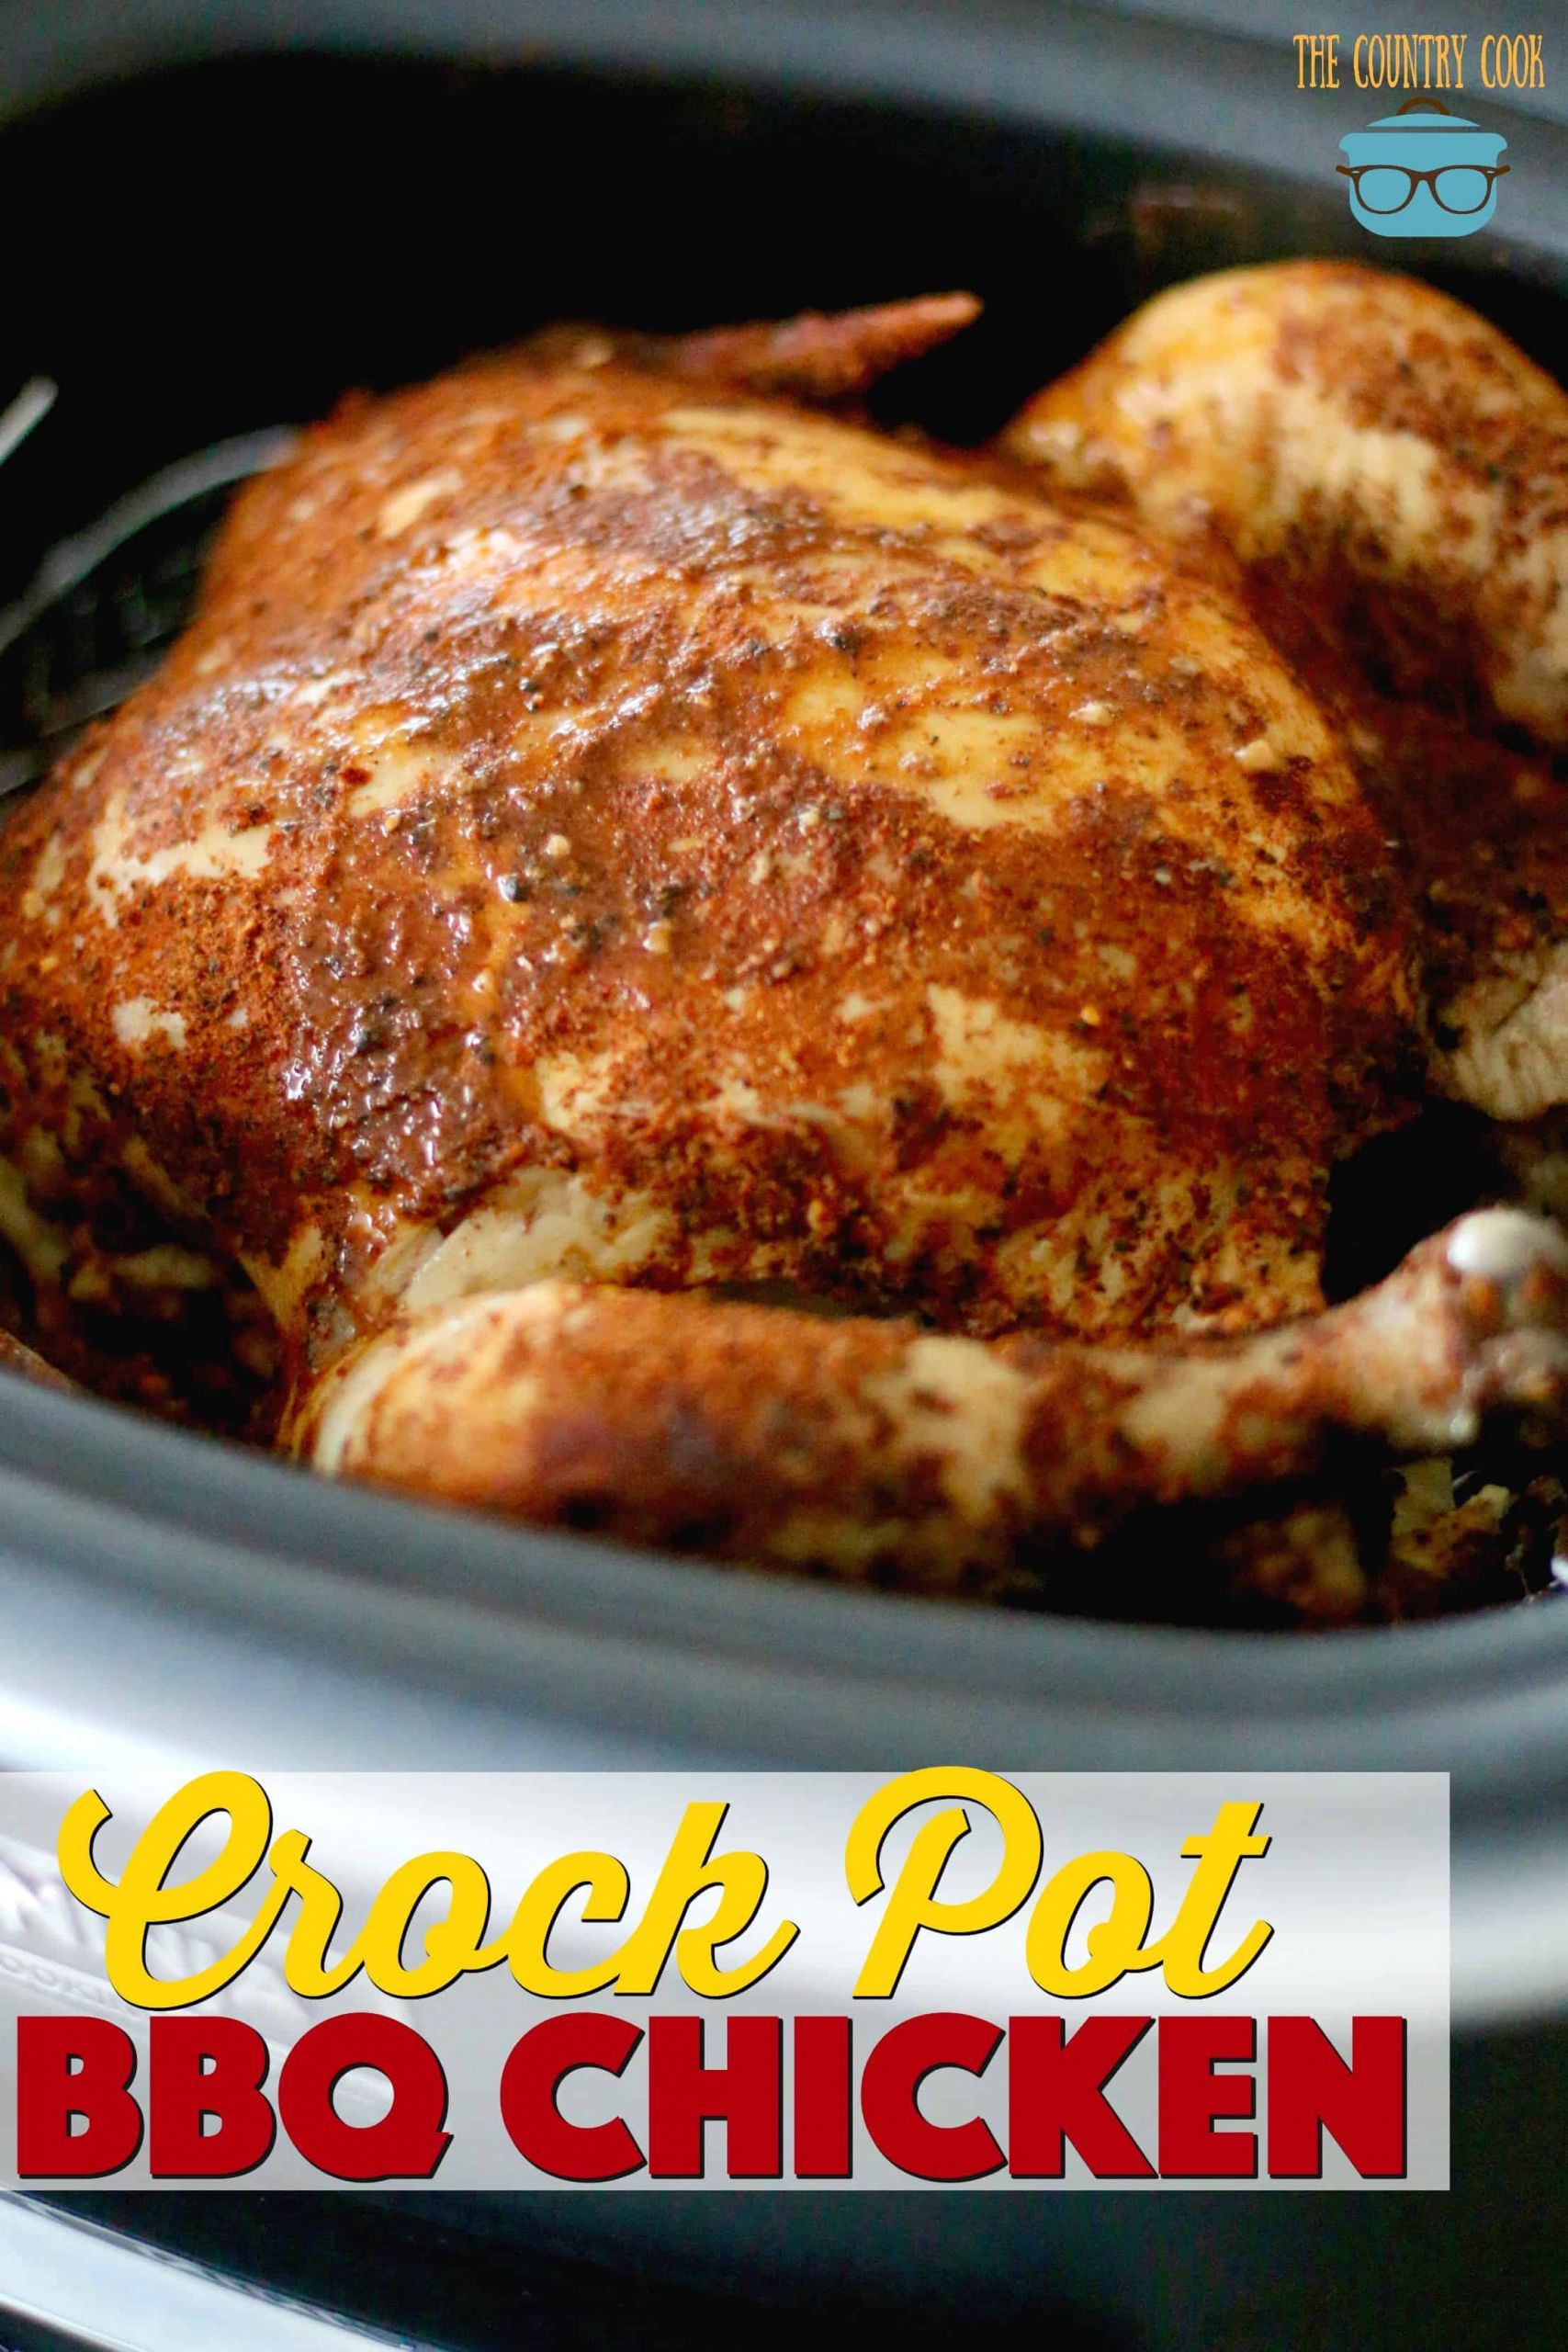 Whole Chicken Crock Pot Recipe
 Crock Pot Whole BBQ Chicken The Country Cook slow cooker